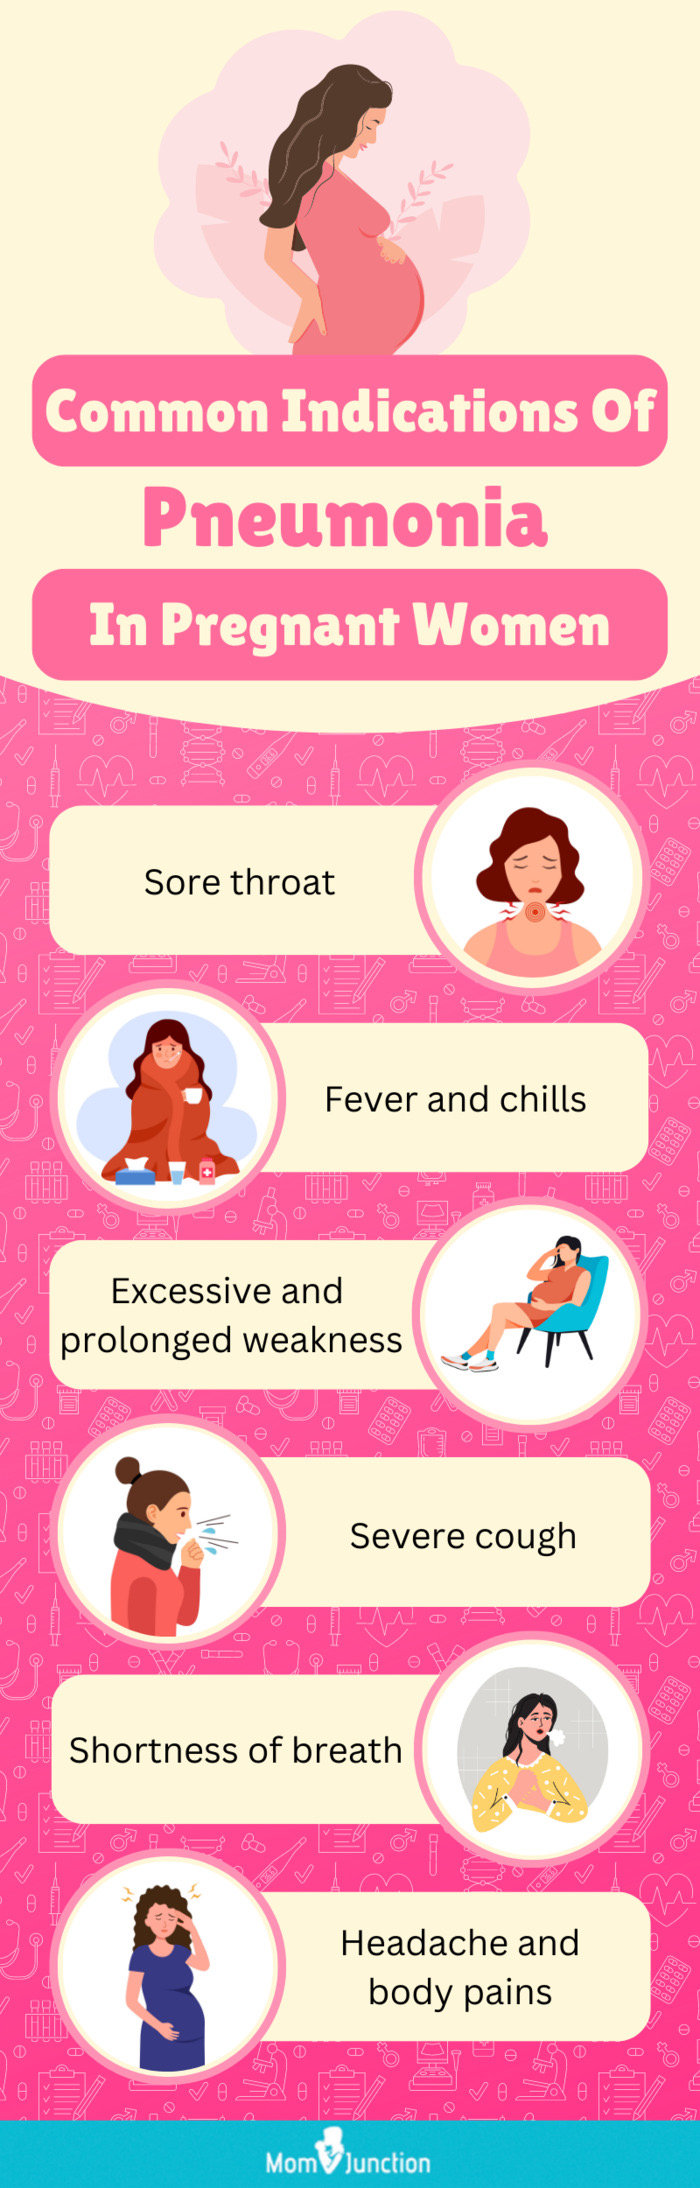 common indications of pneumonia in pregnant woman (infographic)